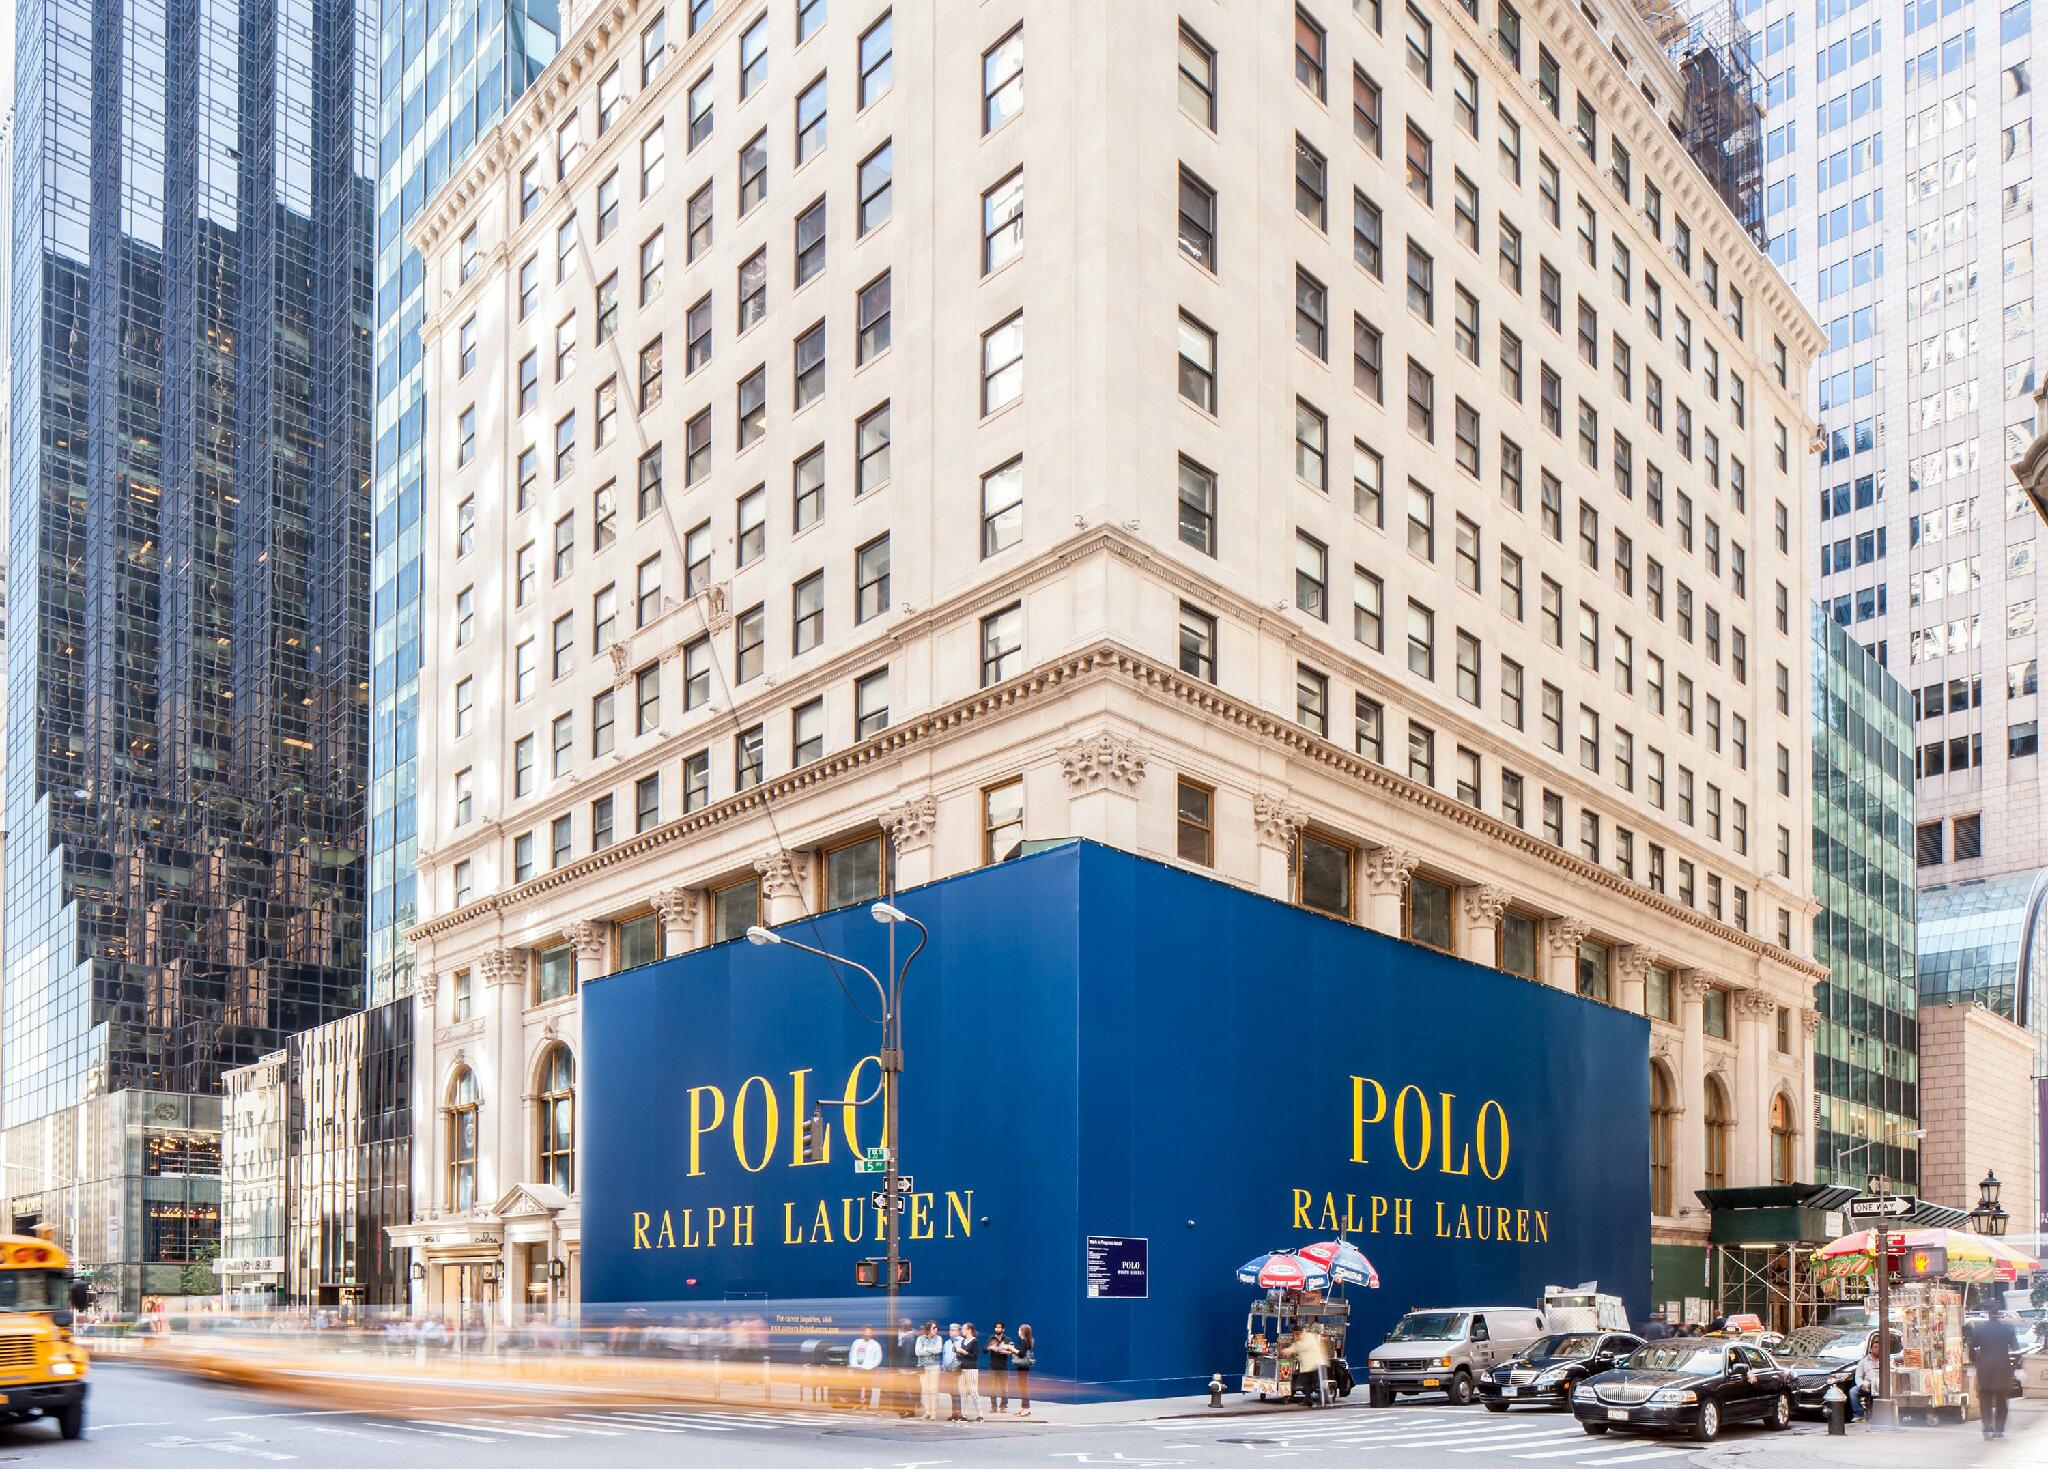 Ralph Lauren on X: "Coming attraction: 5th Ave Polo flagship in heart of NYC.  For career opportunities, visit: http://t.co/WXnzWtvU7A  http://t.co/Y20E1L3F5o" / X